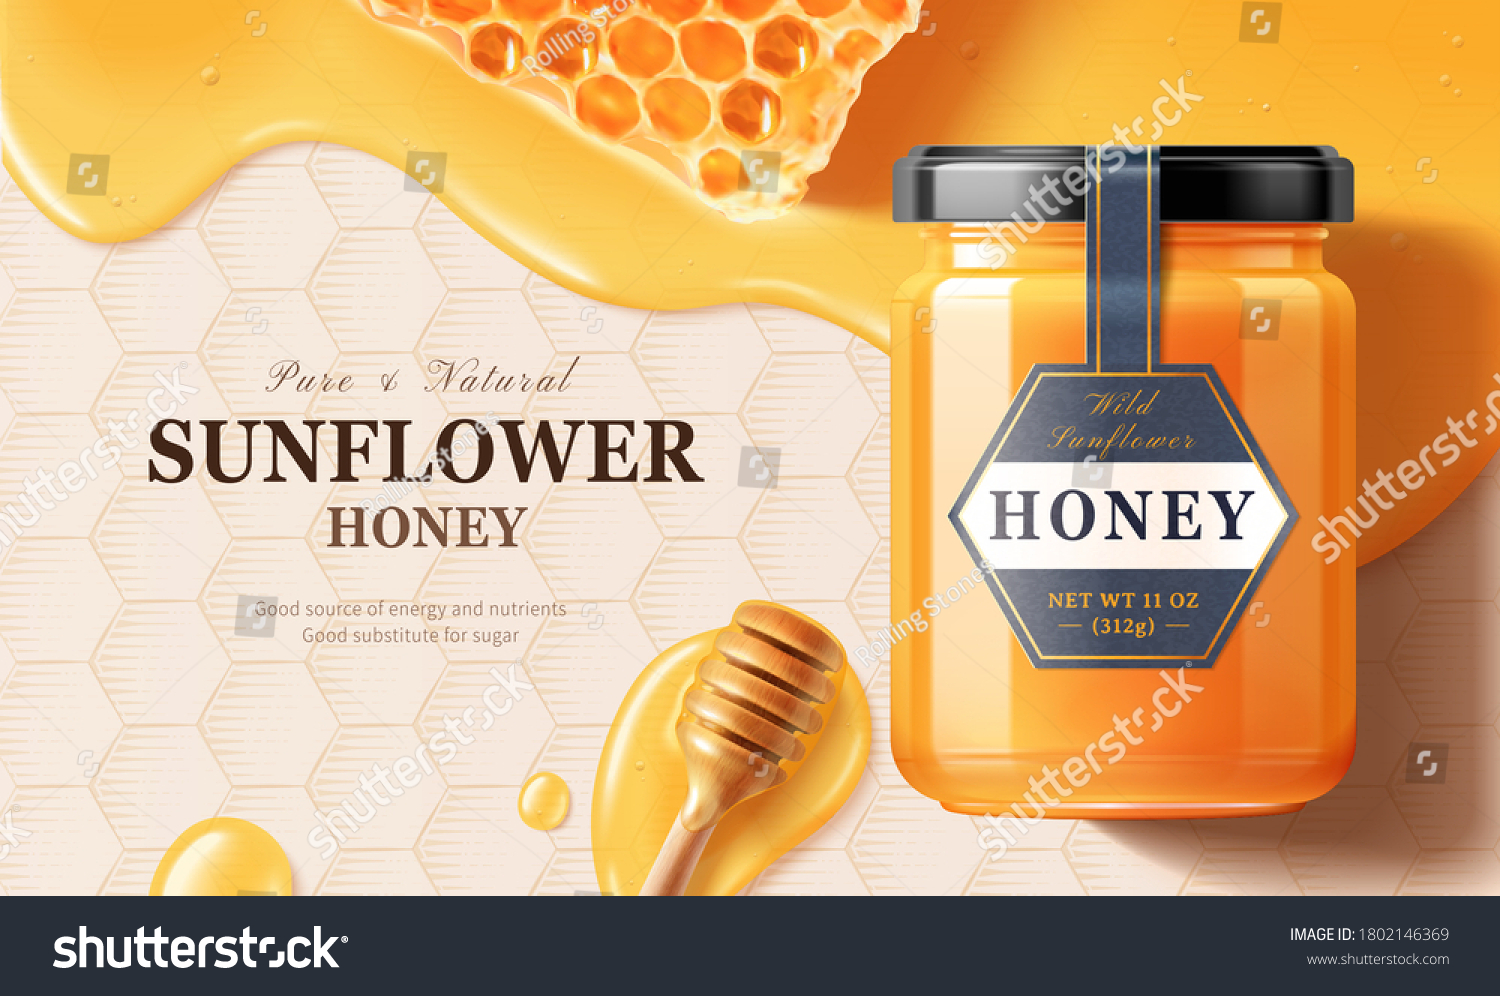 SVG of Flay lay of honey jar over liquid with honey dipper in 3d illustration on honeycomb engraved background svg